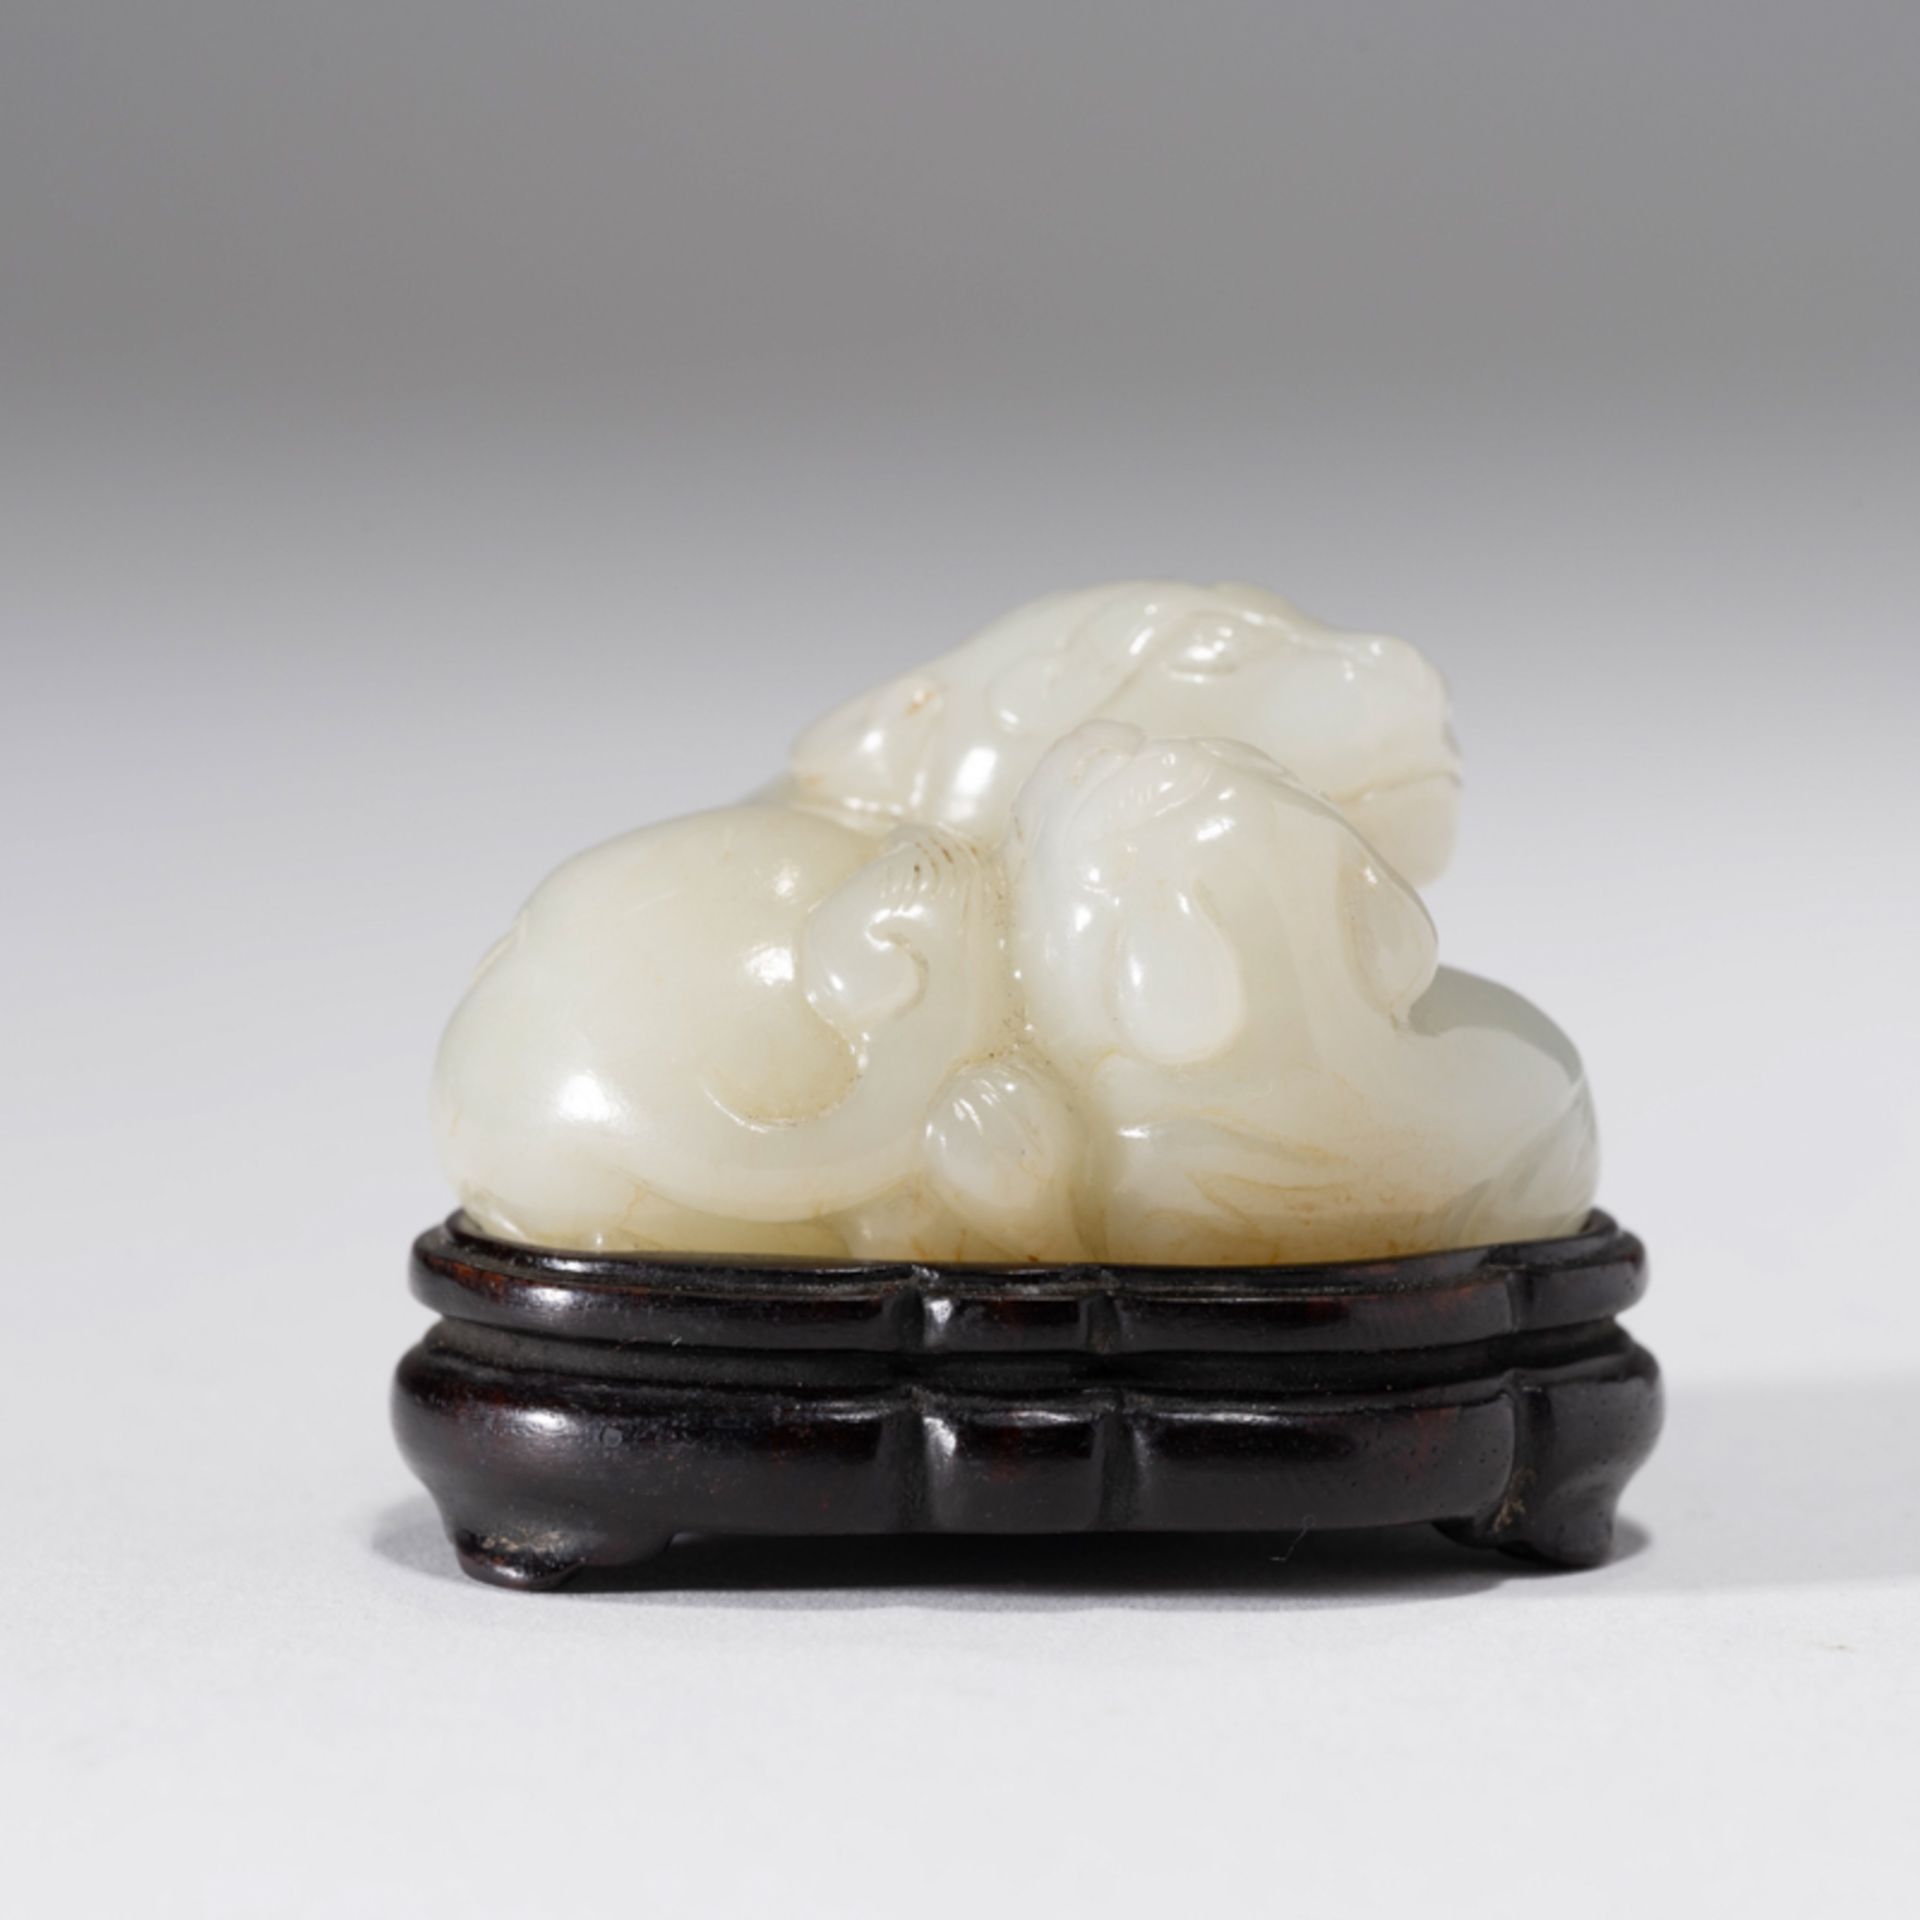 A CHINESE WHITE JADE BEAST-FORM WEIGHT - Image 4 of 7